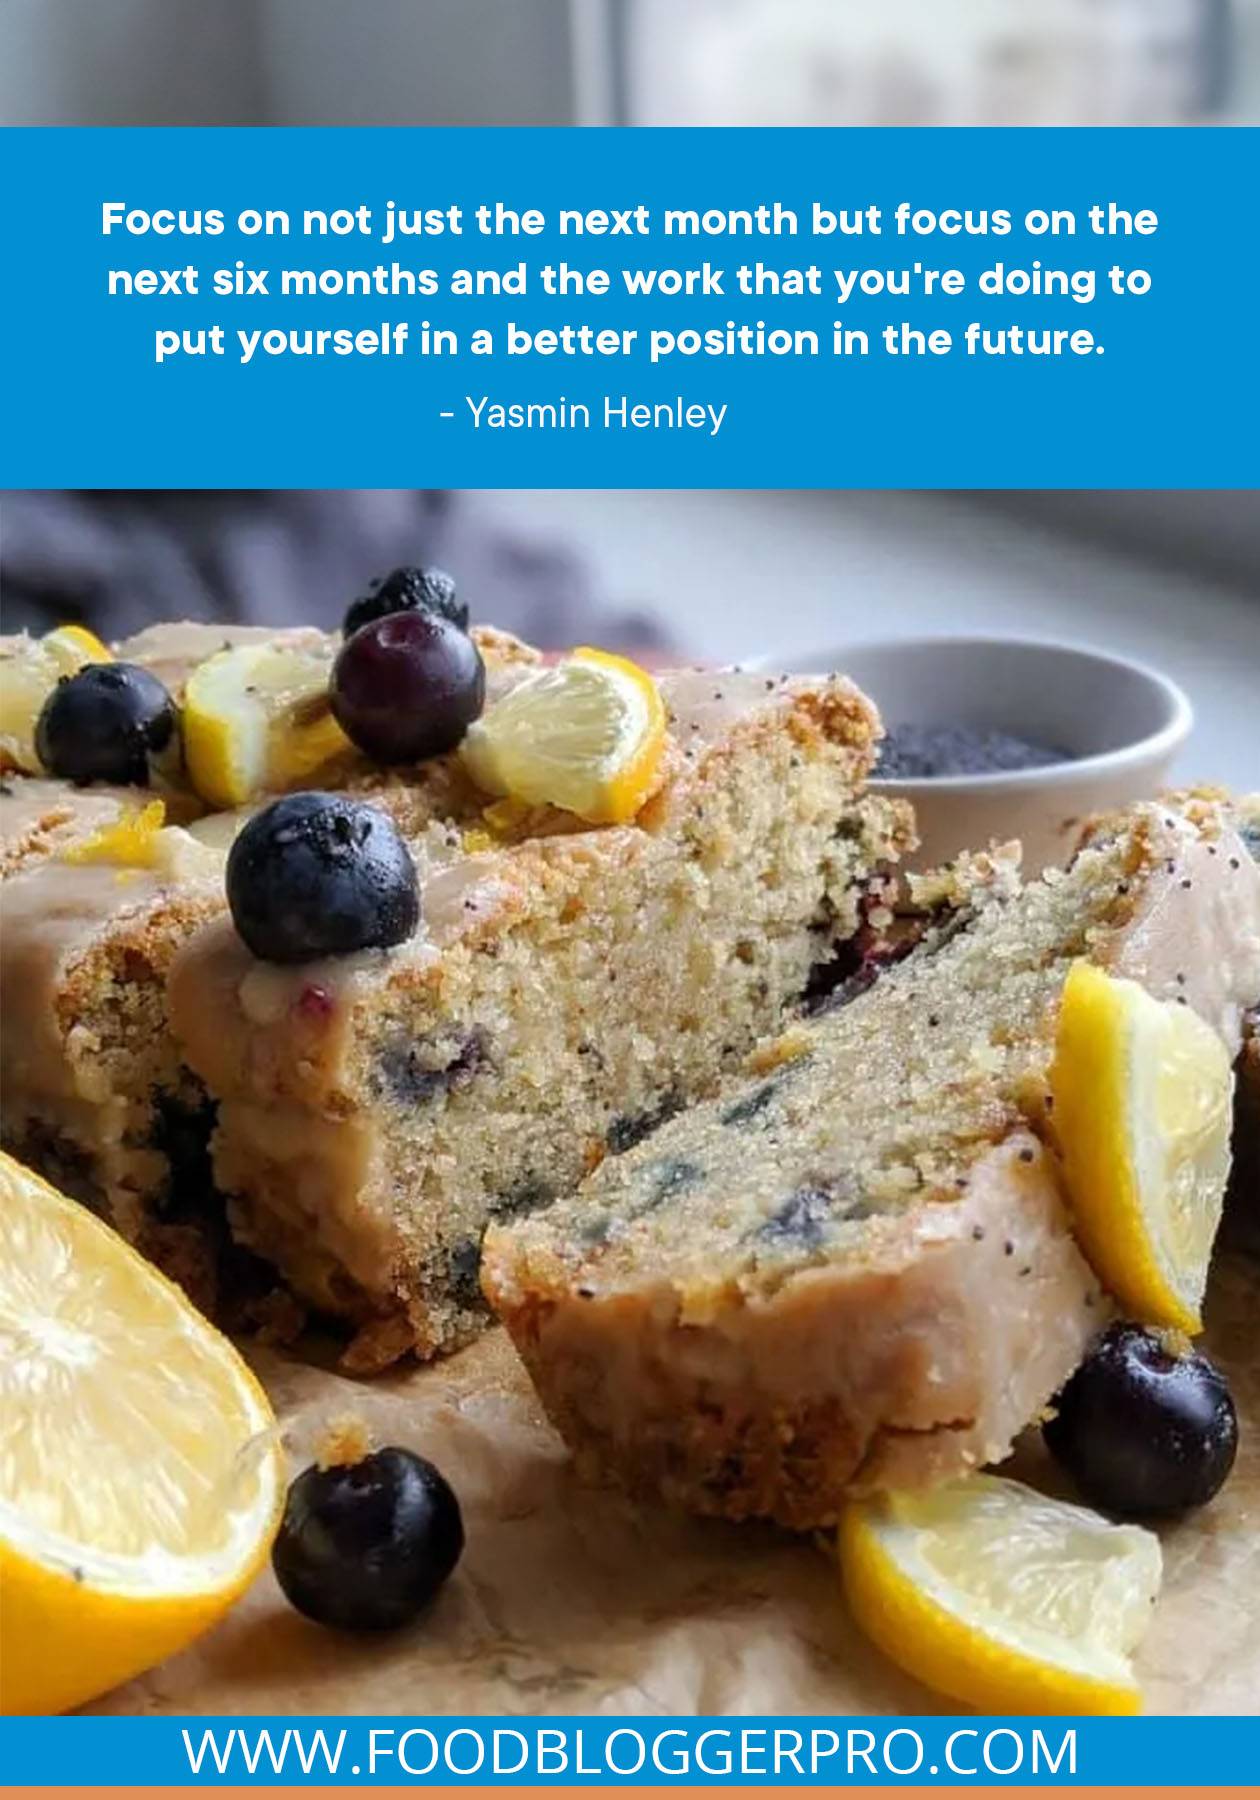 A photograph of lemon blueberry poppyseed bread with a quote from Yasmin Henley that reads: "Focus on not just the next month but focus on the next six months and the work that you're doing to put yourself in a better position in the future."